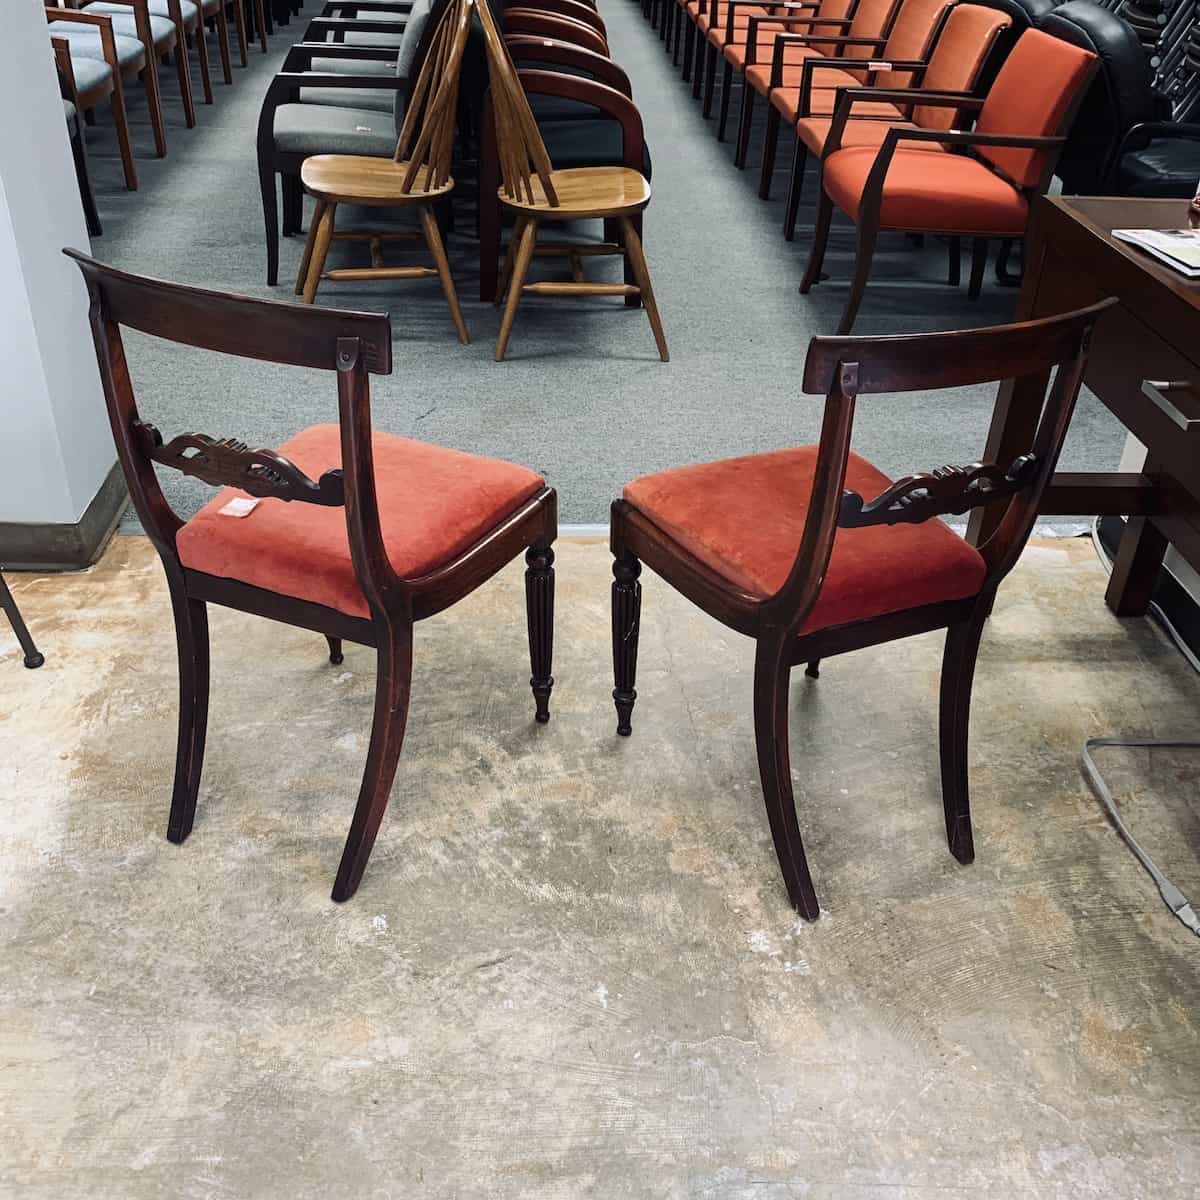 Antique-scroll-chairs-back